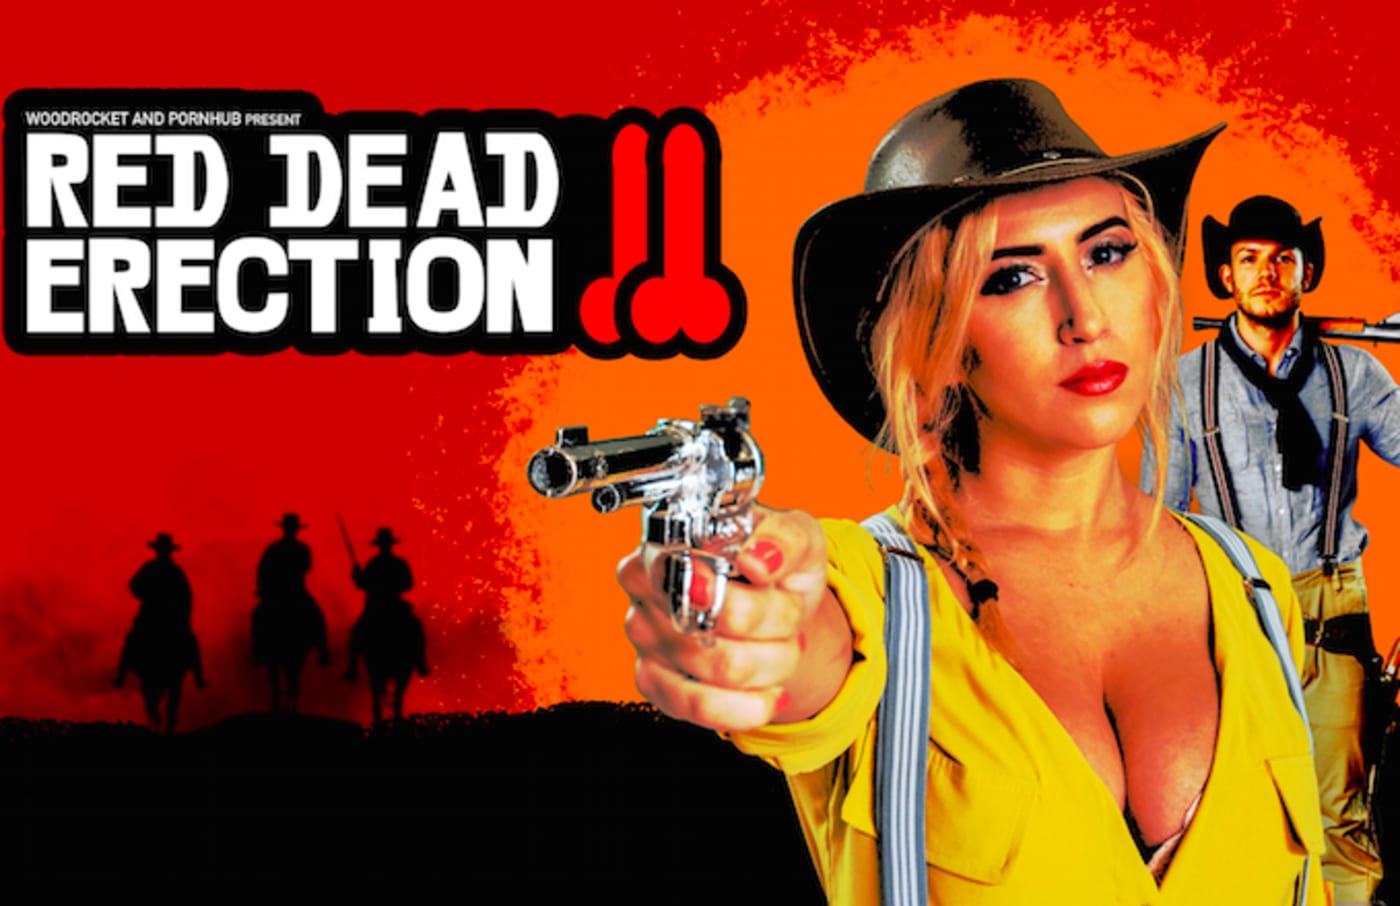 Red Dead - There's Now an Adult Film Parody of 'Red Dead Redemption II' | Complex